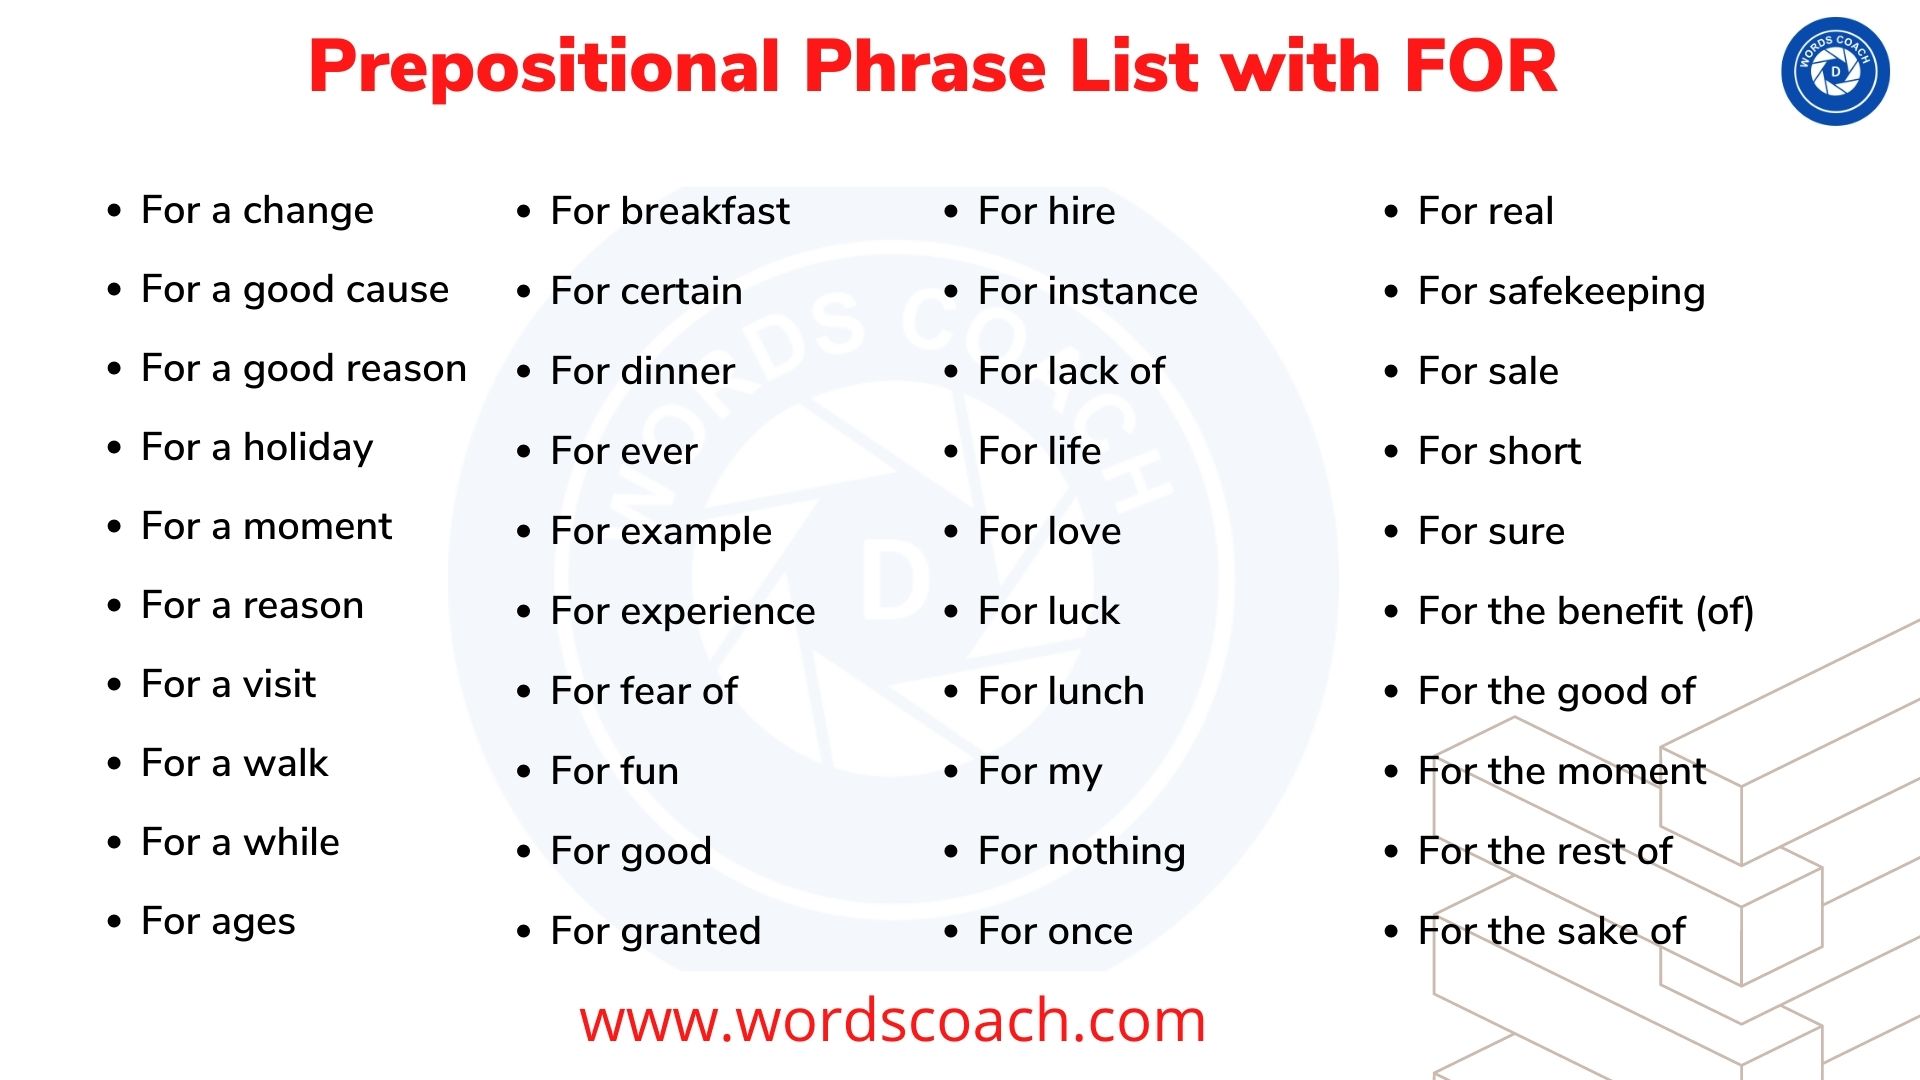 Prepositional Phrase List with FOR - wordscoach.com